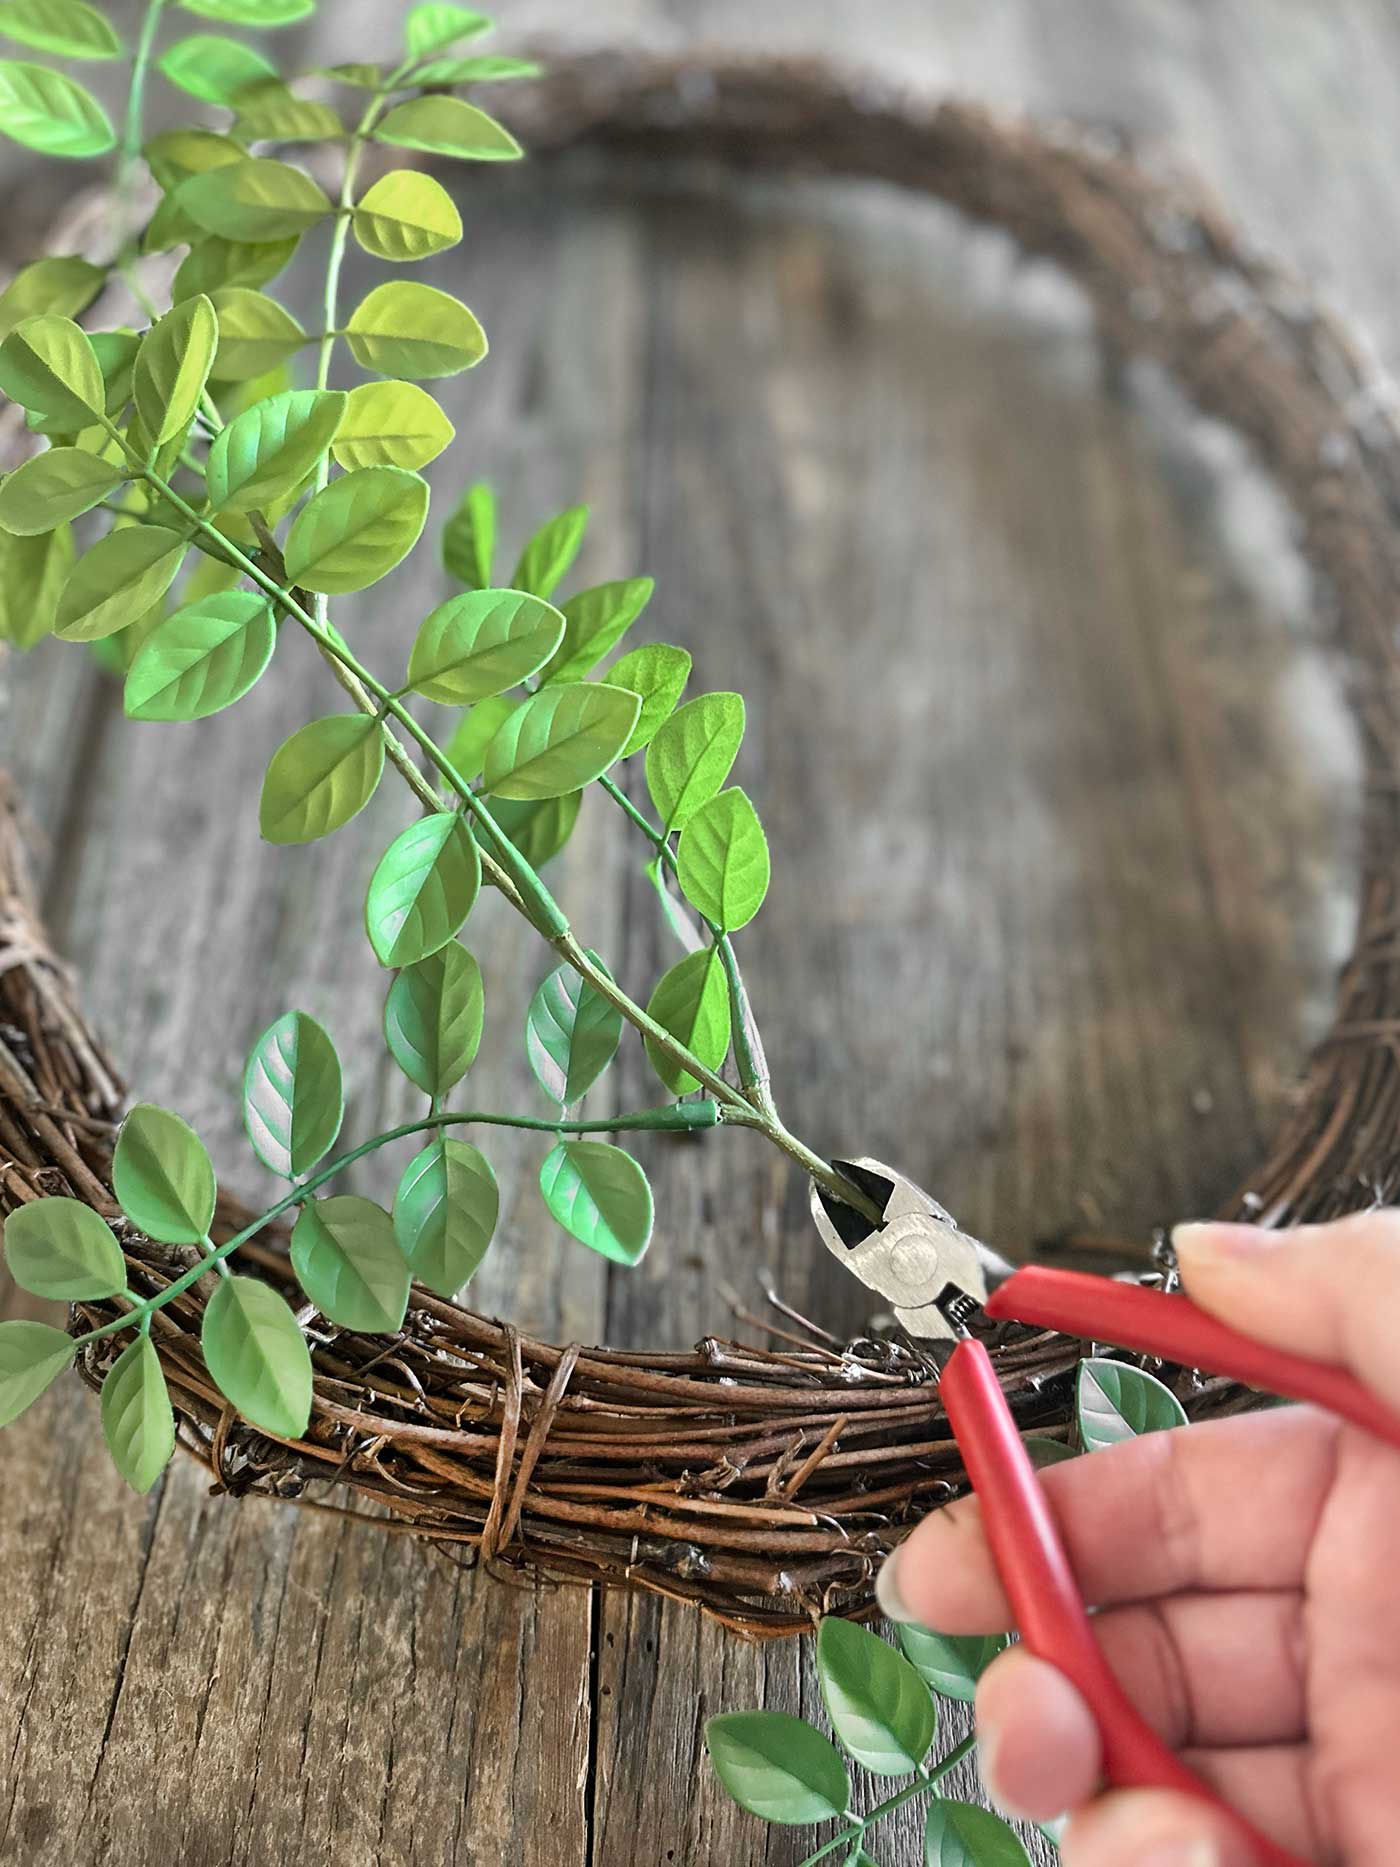 using wire cutters to cut a floral stem